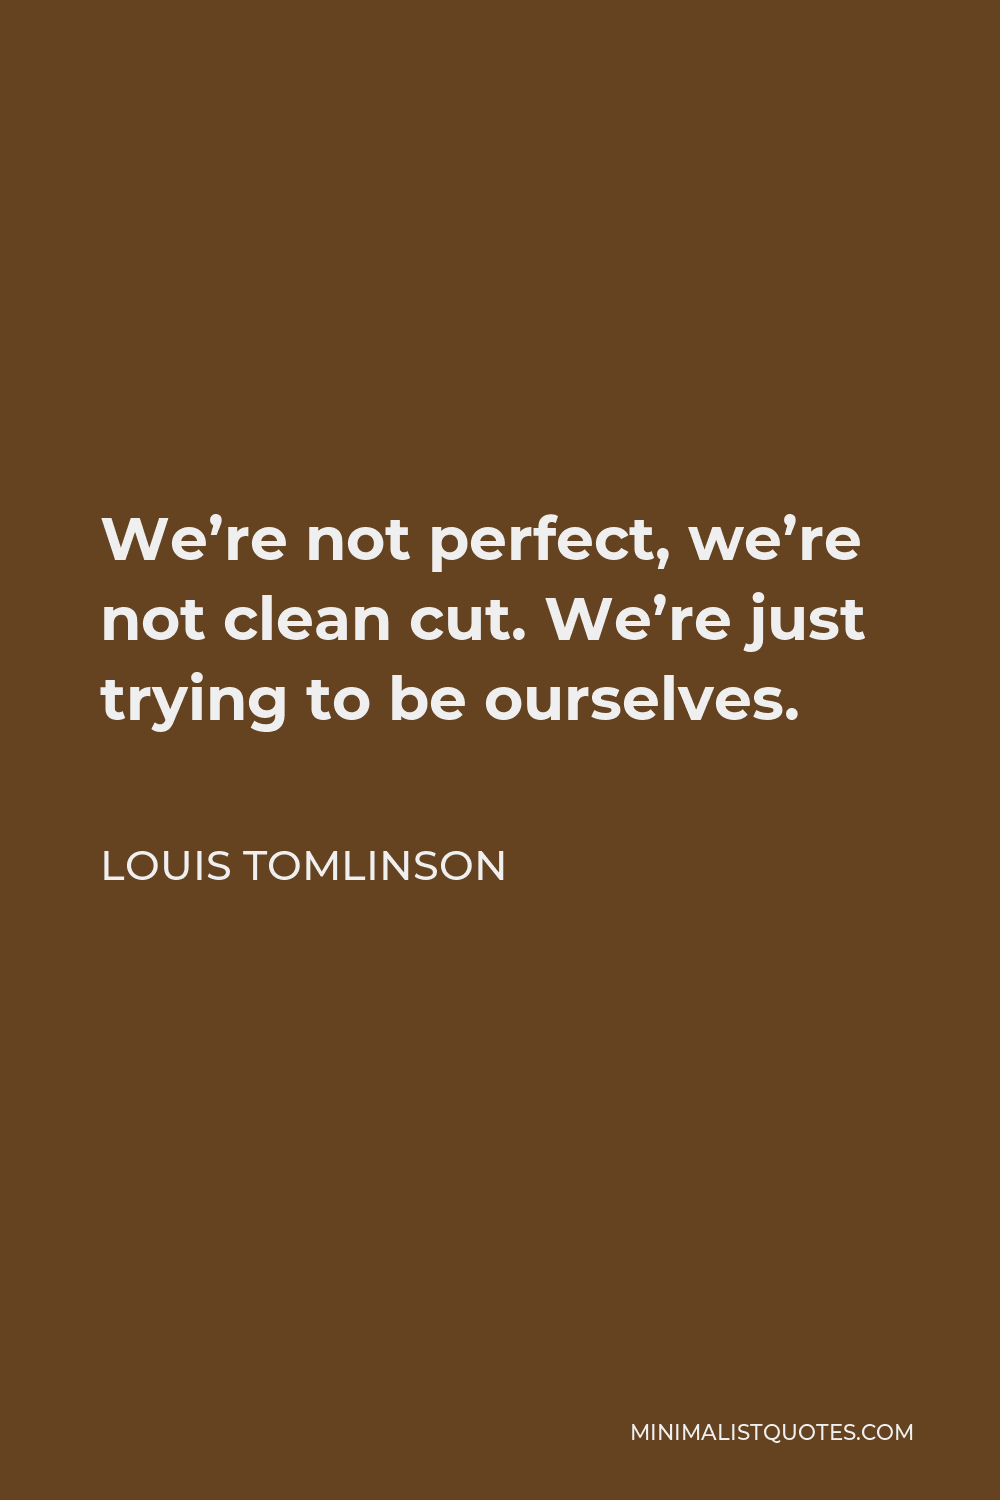 Louis Tomlinson Quote - We’re not perfect, we’re not clean cut. We’re just trying to be ourselves.